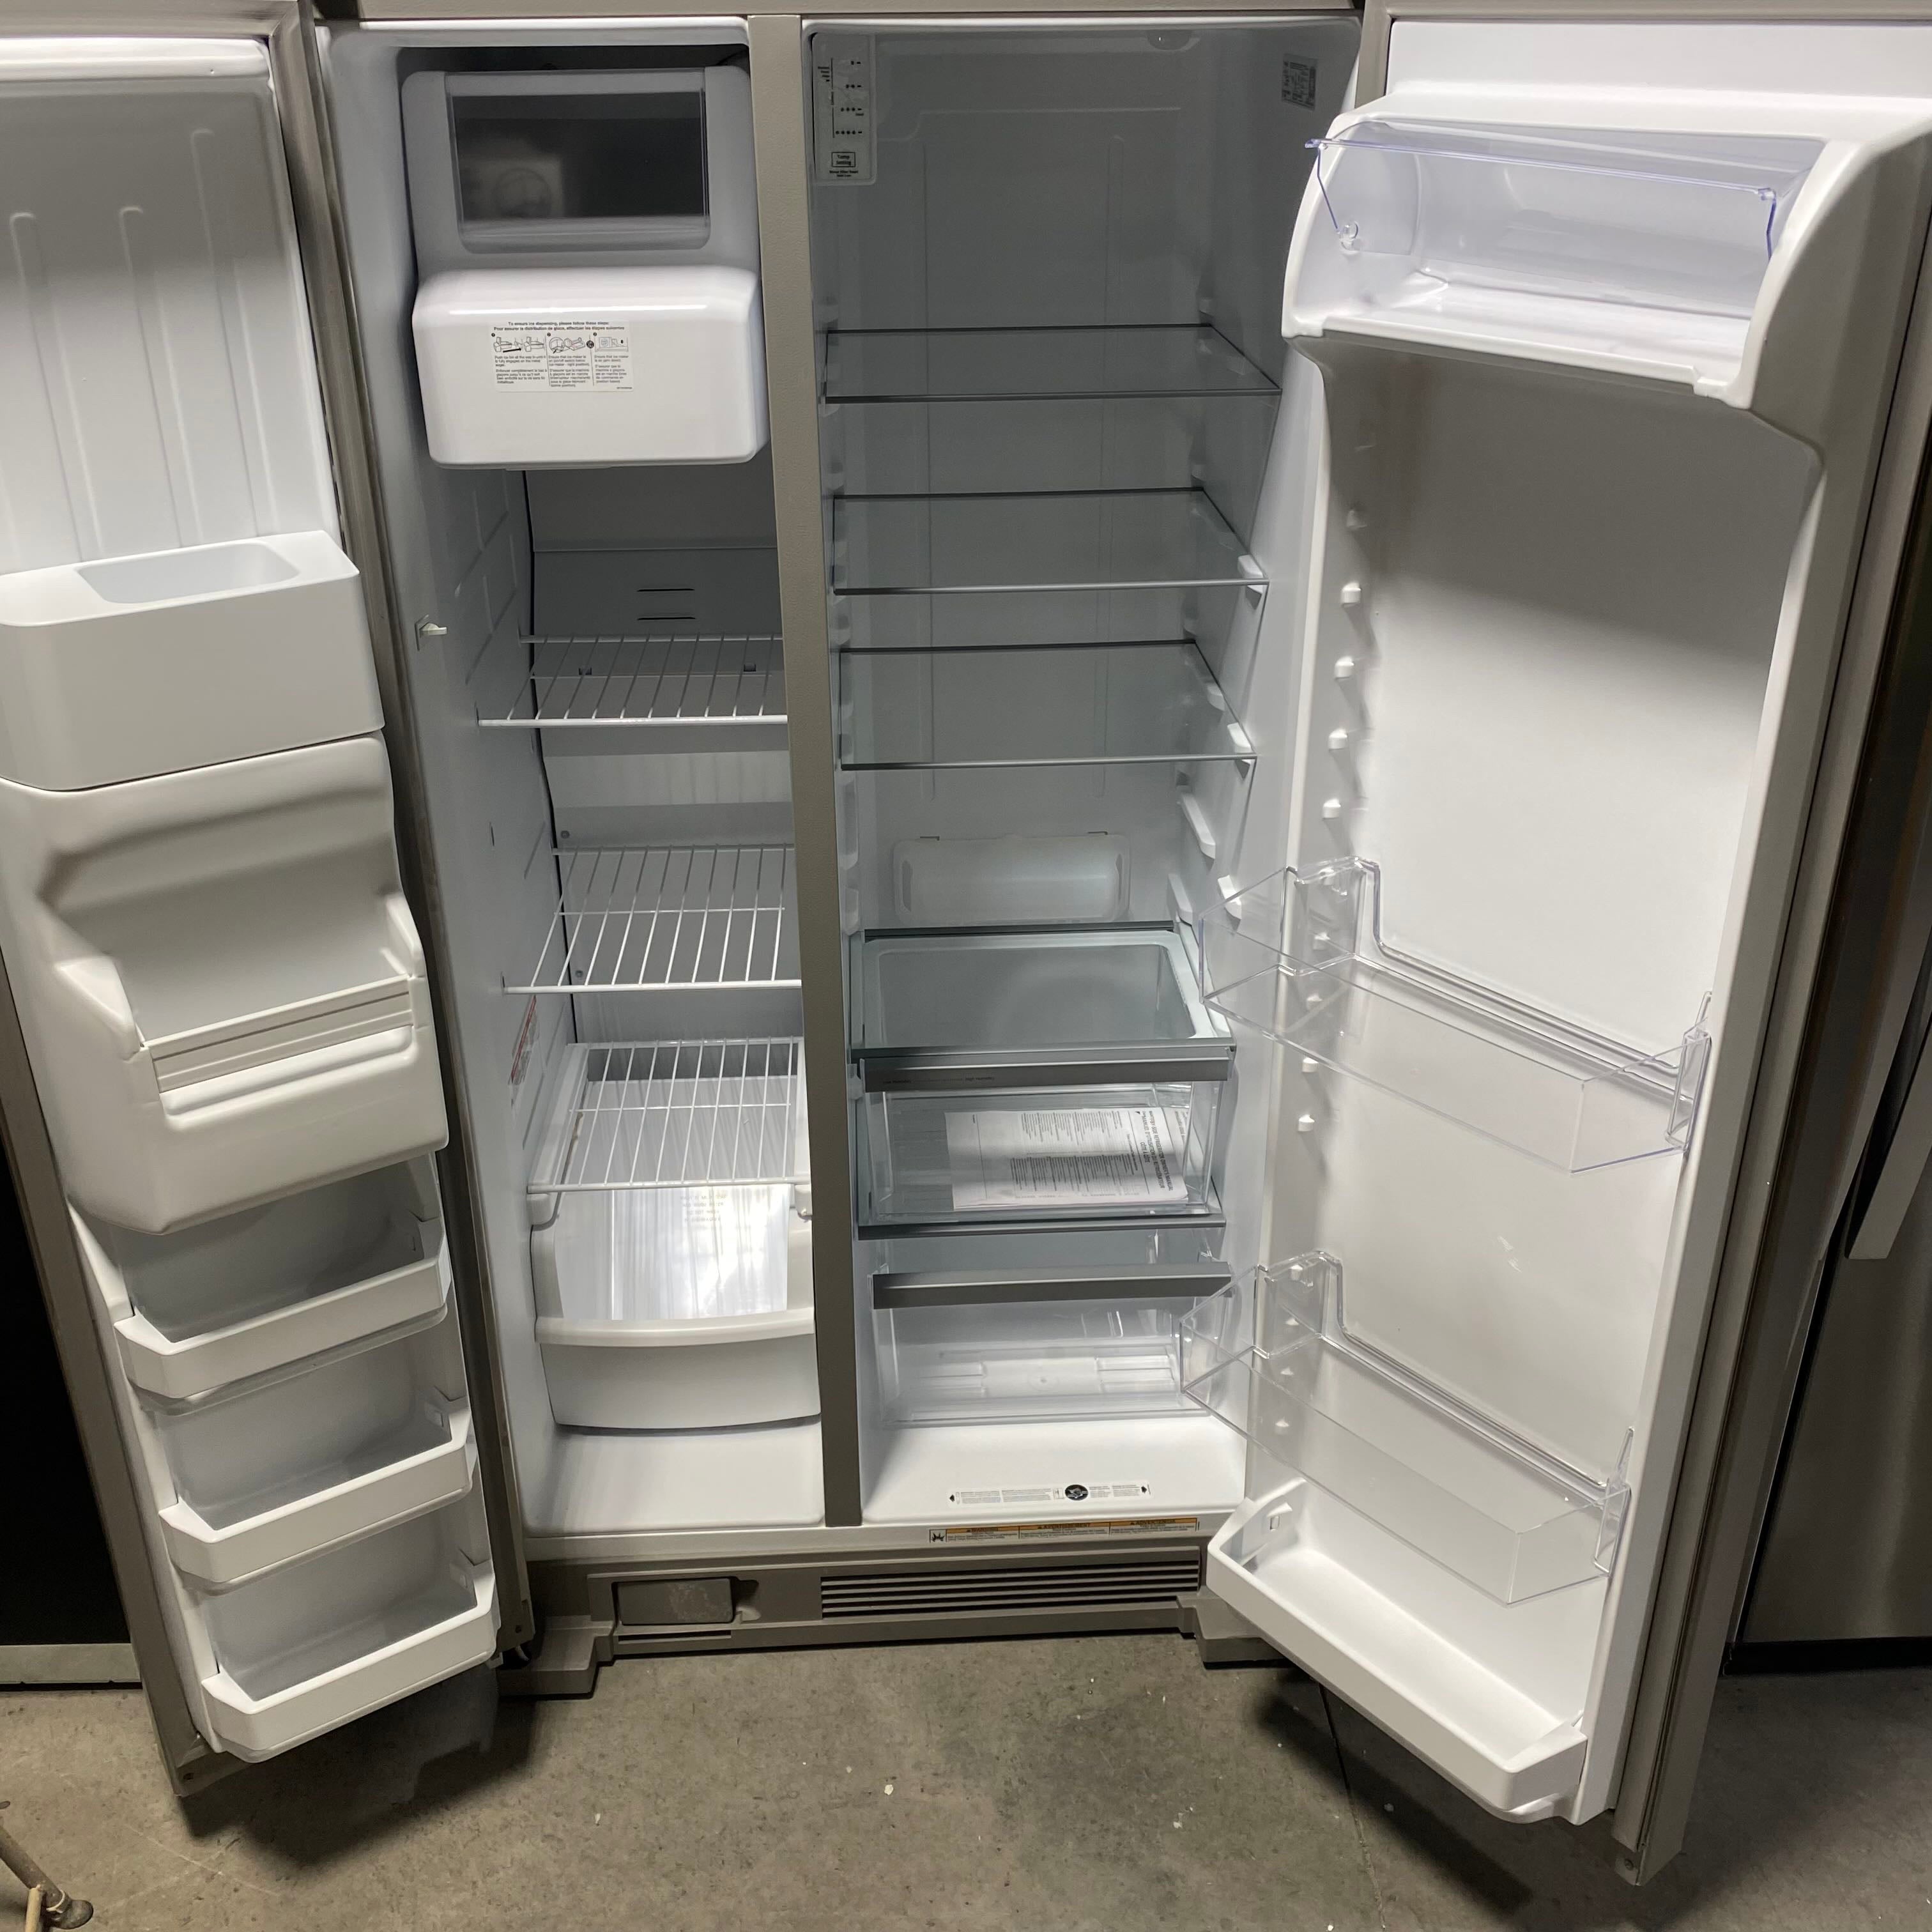 E322 36"x 32"x 70" Stainless Whirlpool Side By Side Refrigerator WRS315SDHM08/HRA3684696